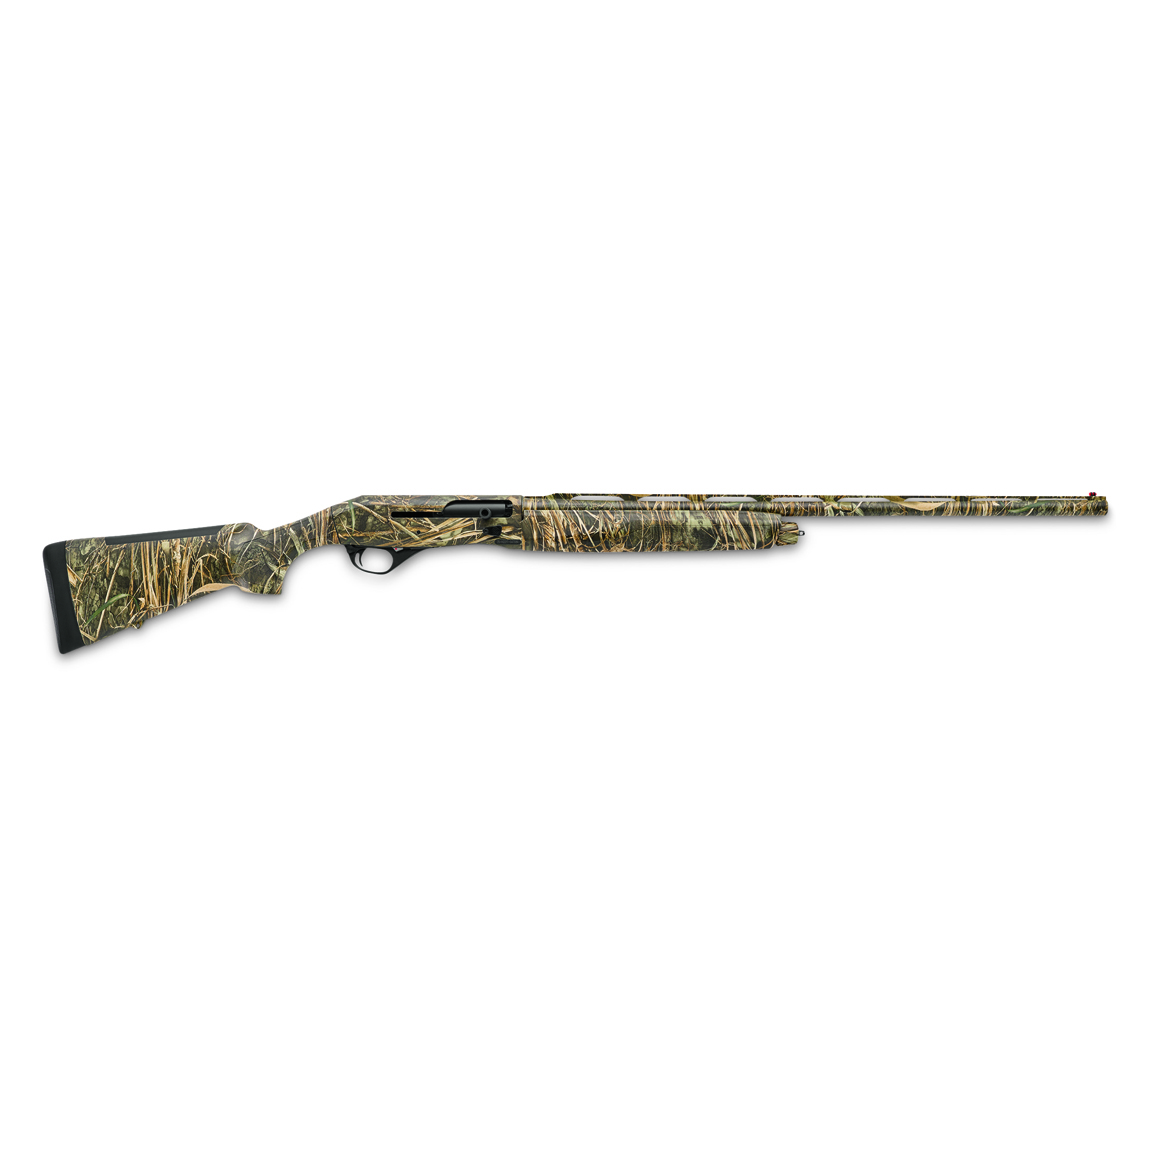 Stoeger M3020, Semi-automatic, 20 Gauge, 28" Barrel, Realtree MAX-7, 4+1 Rounds